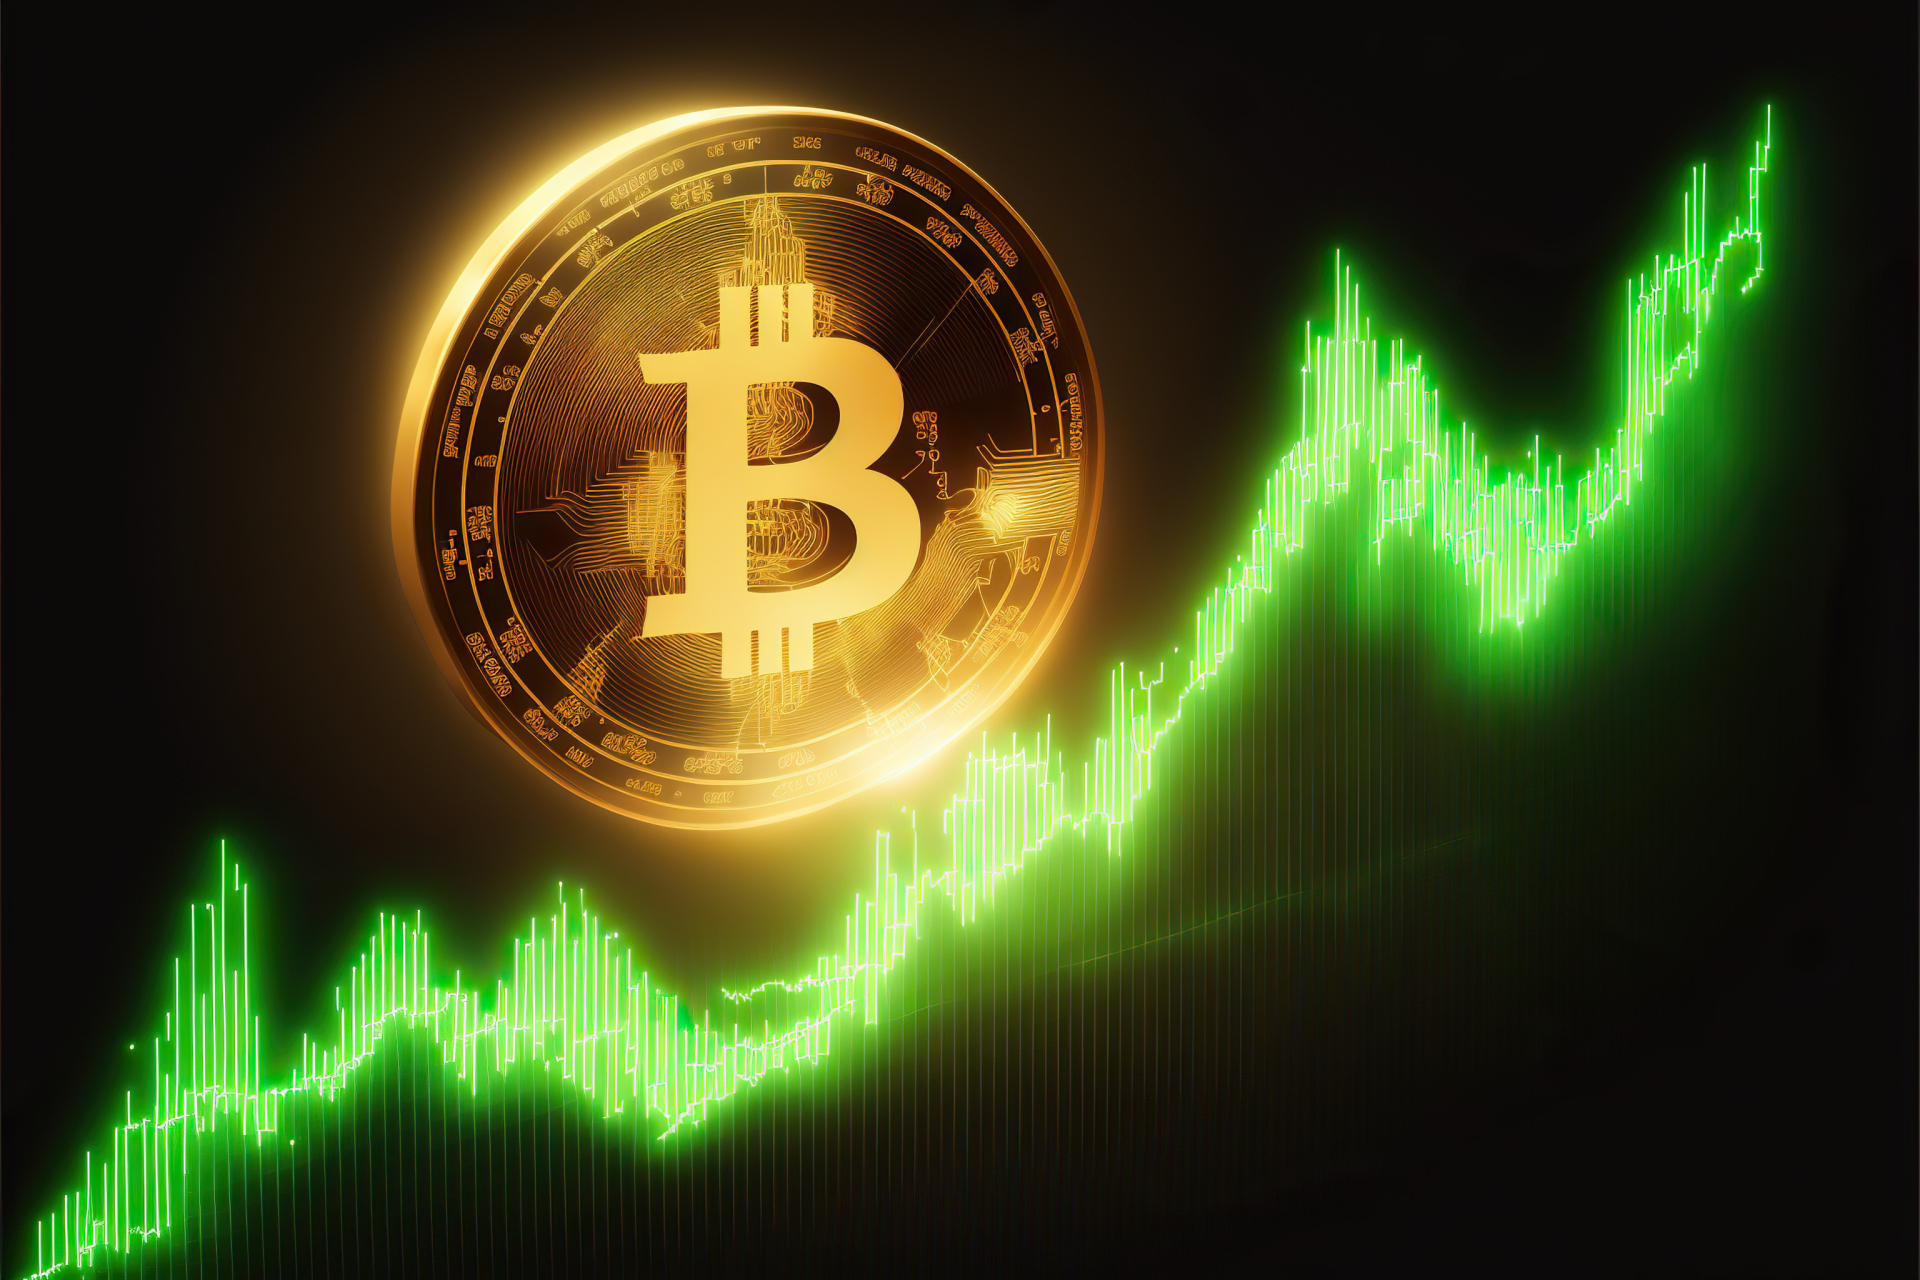 Peter Brandt predicts Bitcoin price of $175 thousand in 2025
